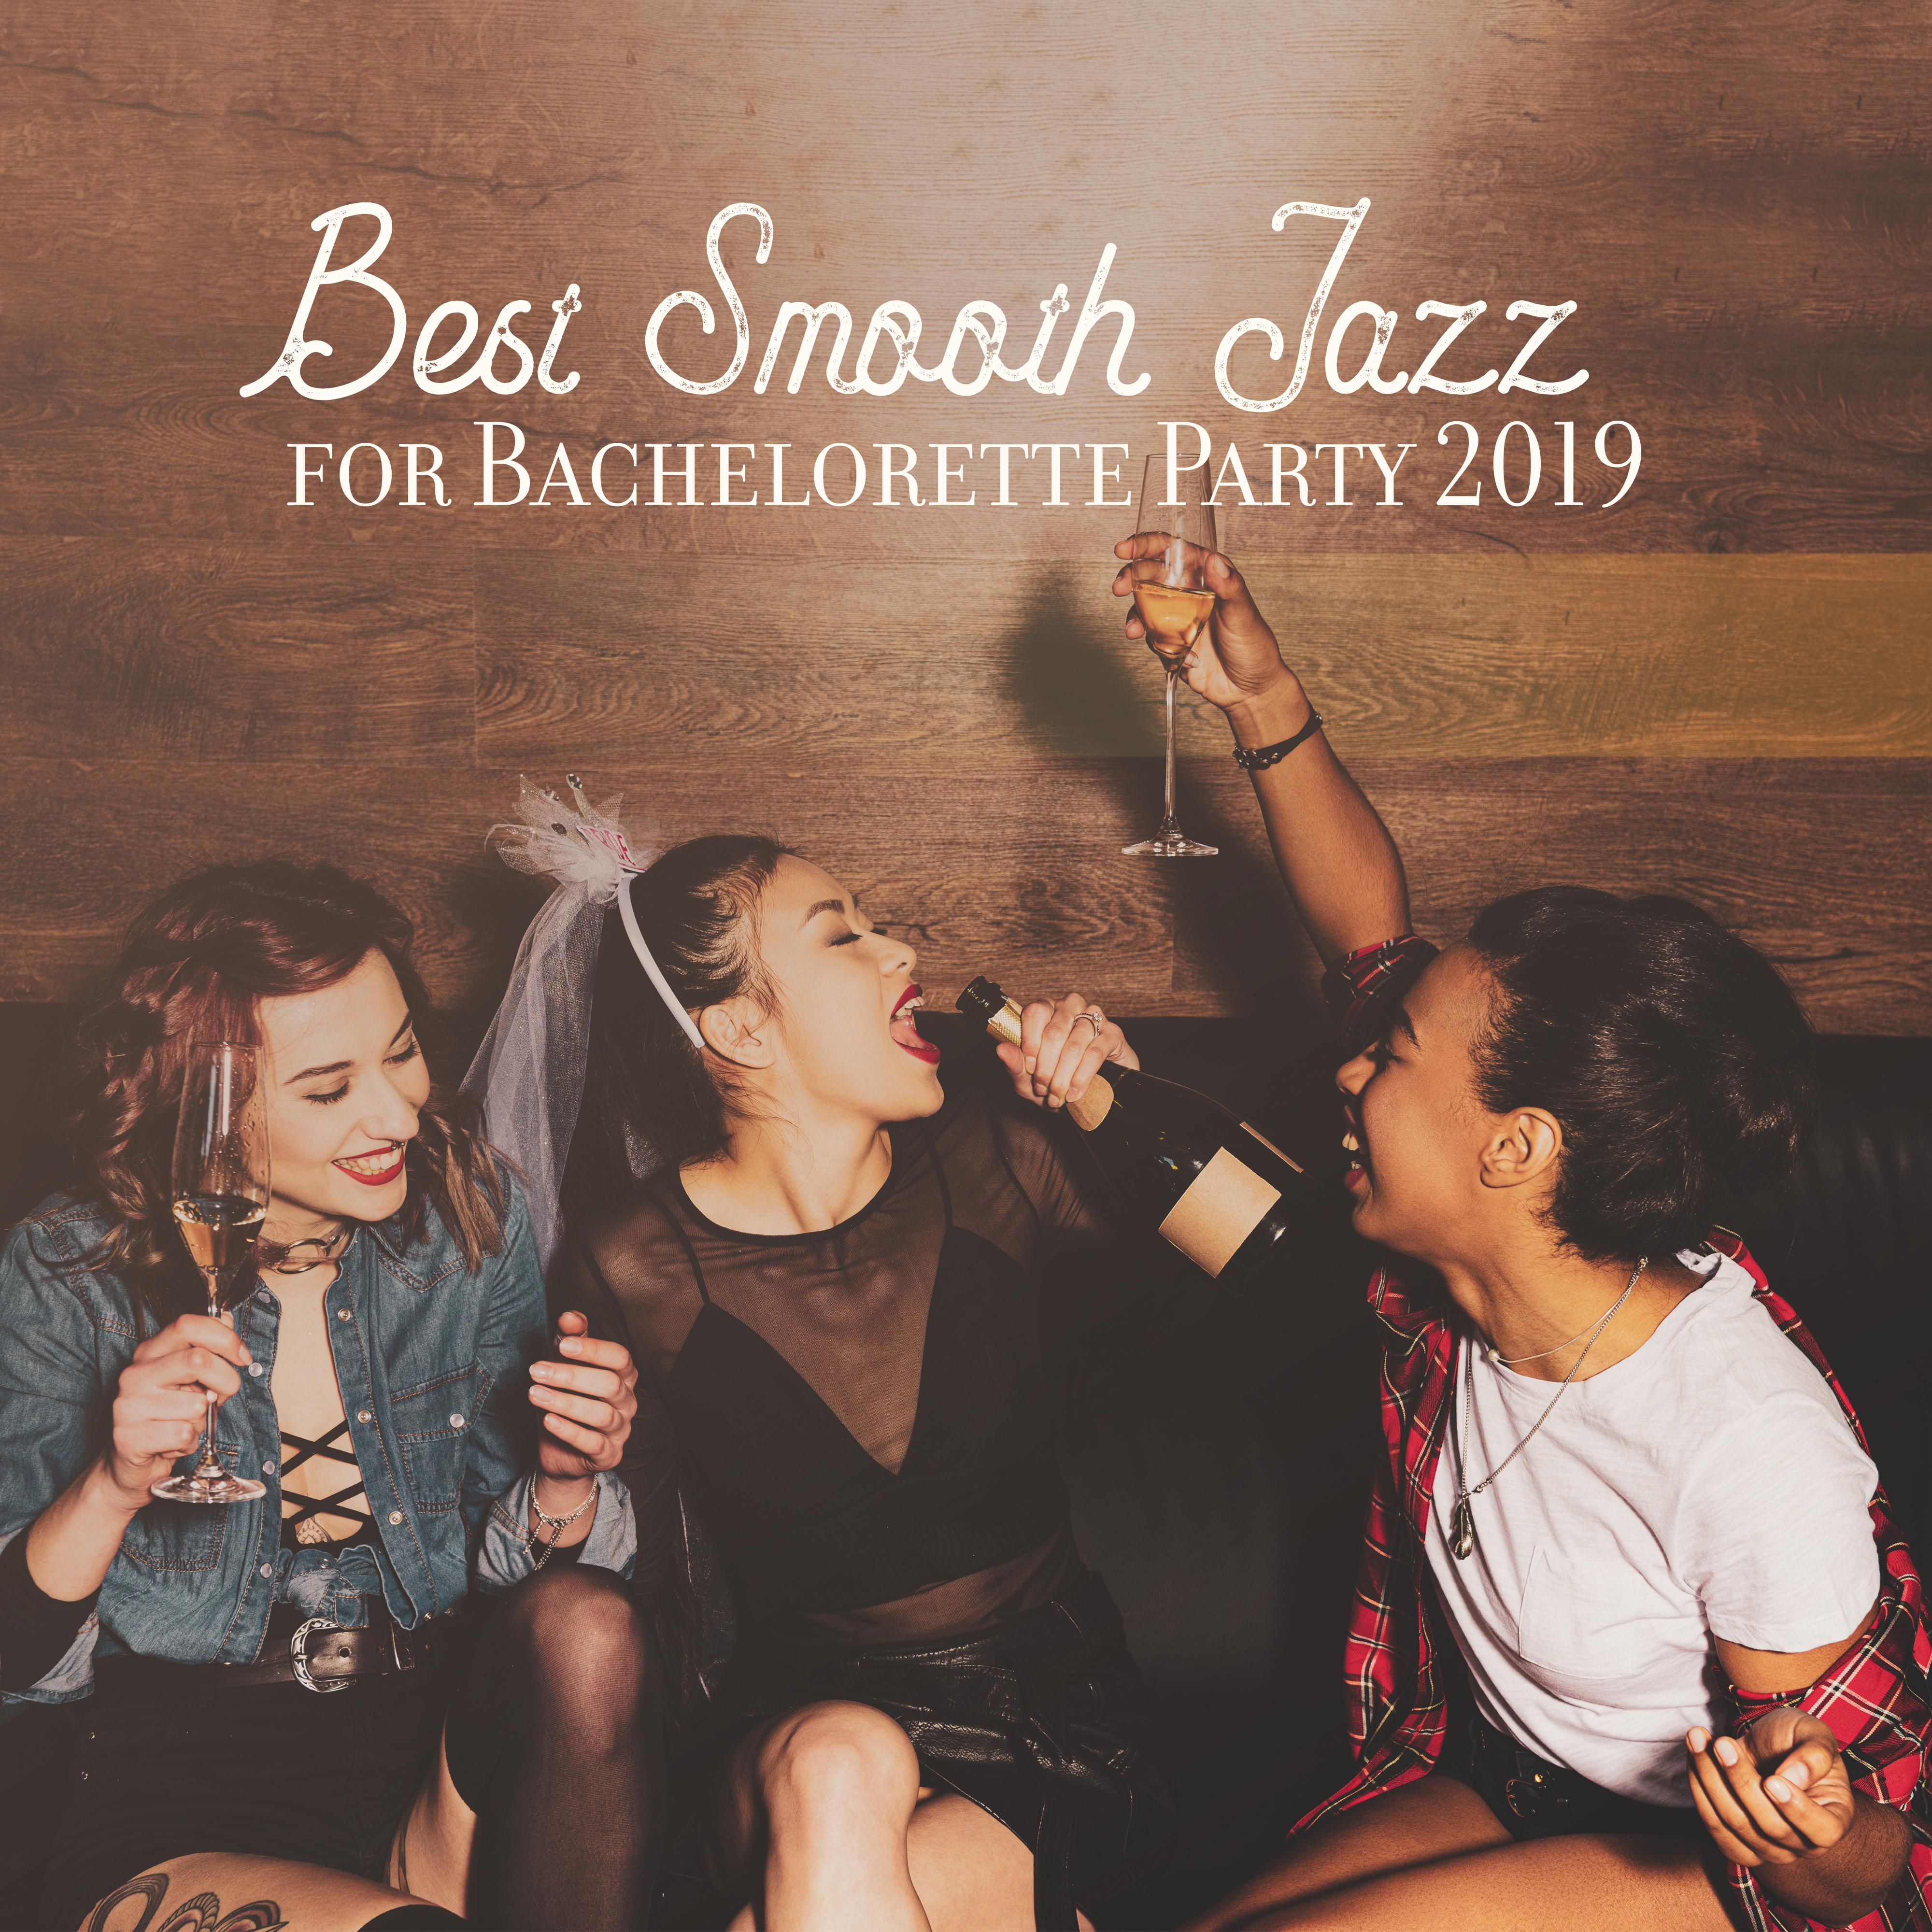 Best Smooth Jazz for Bachelorette Party 2019